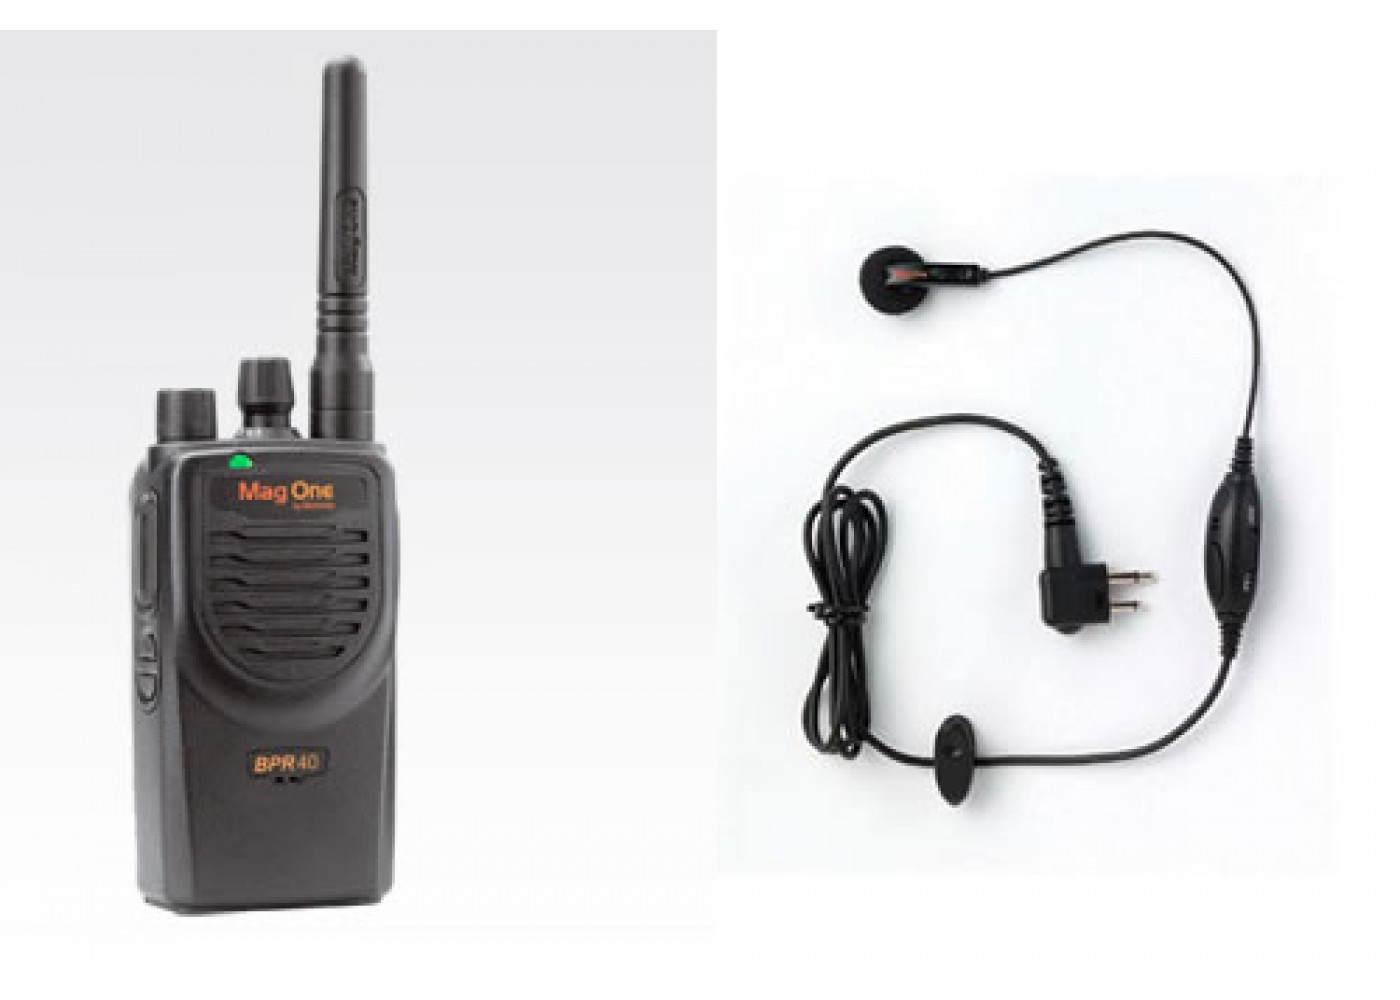 BPR40 UHF channel two-way radio with free headset